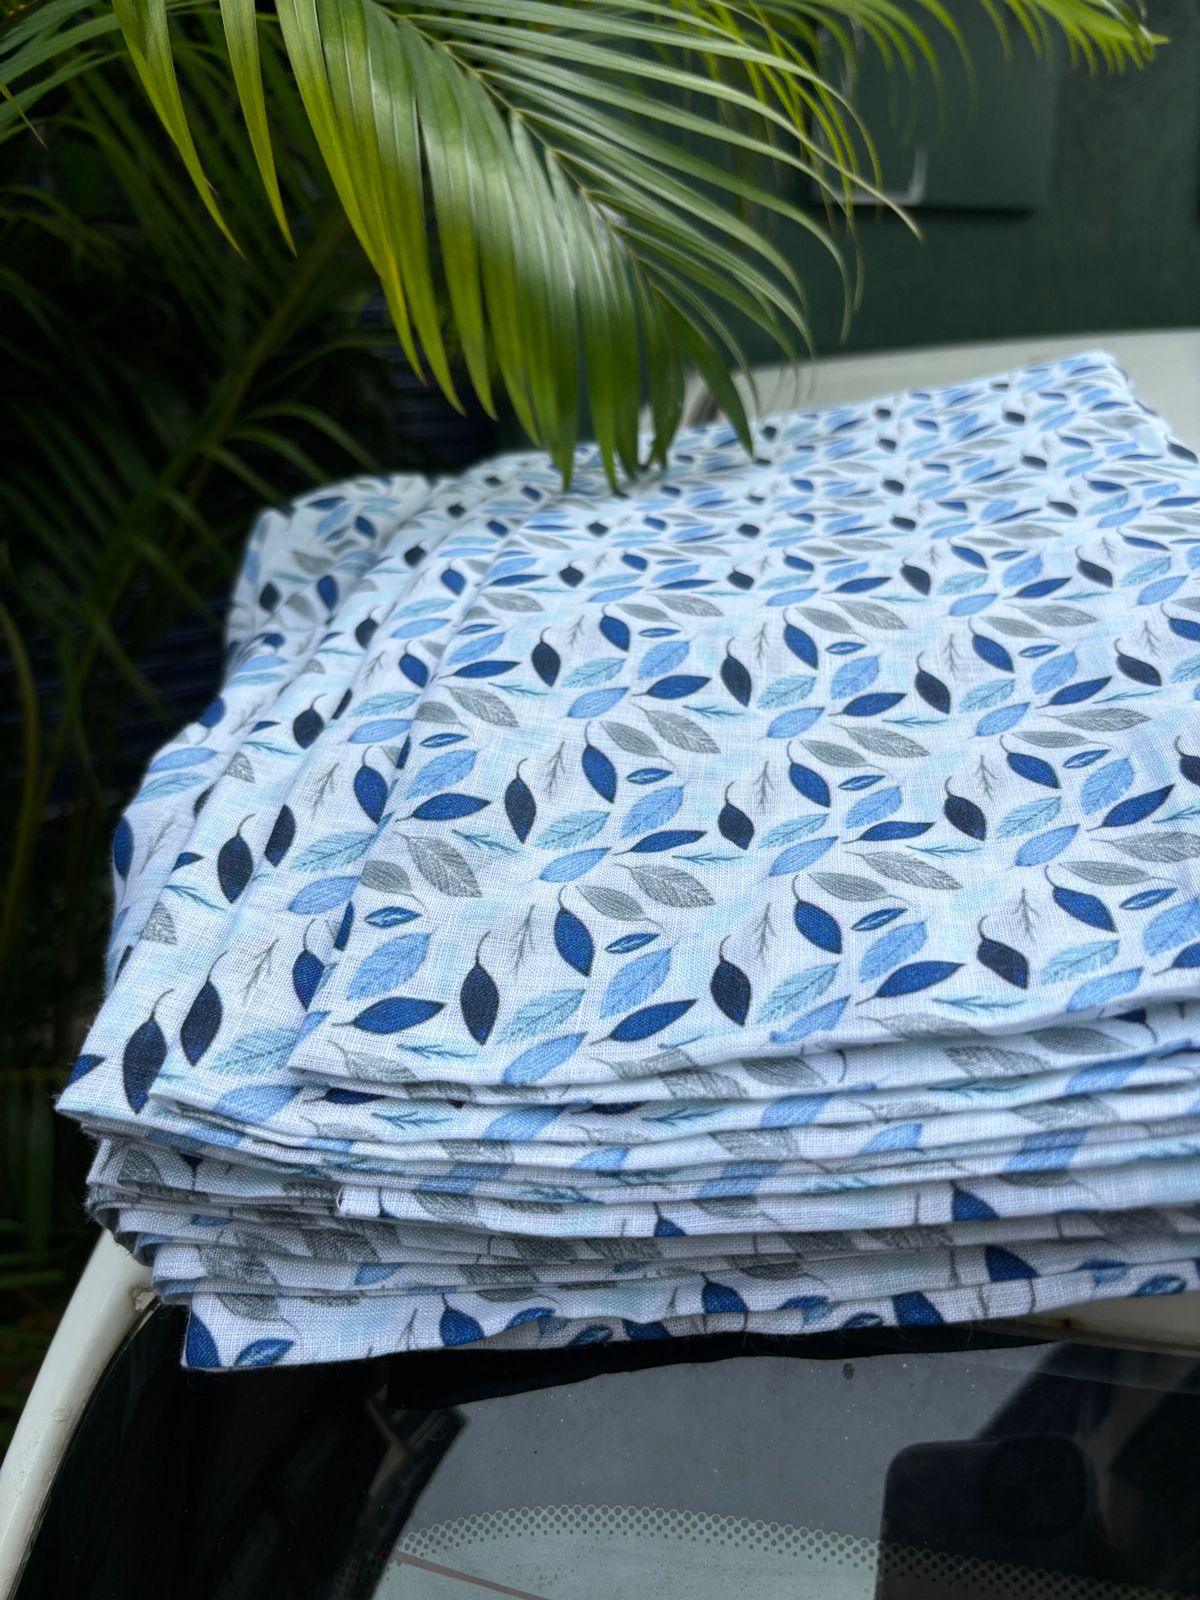 100% linen  digital print fabric 58" wide white with shades of blue leaves [16112]